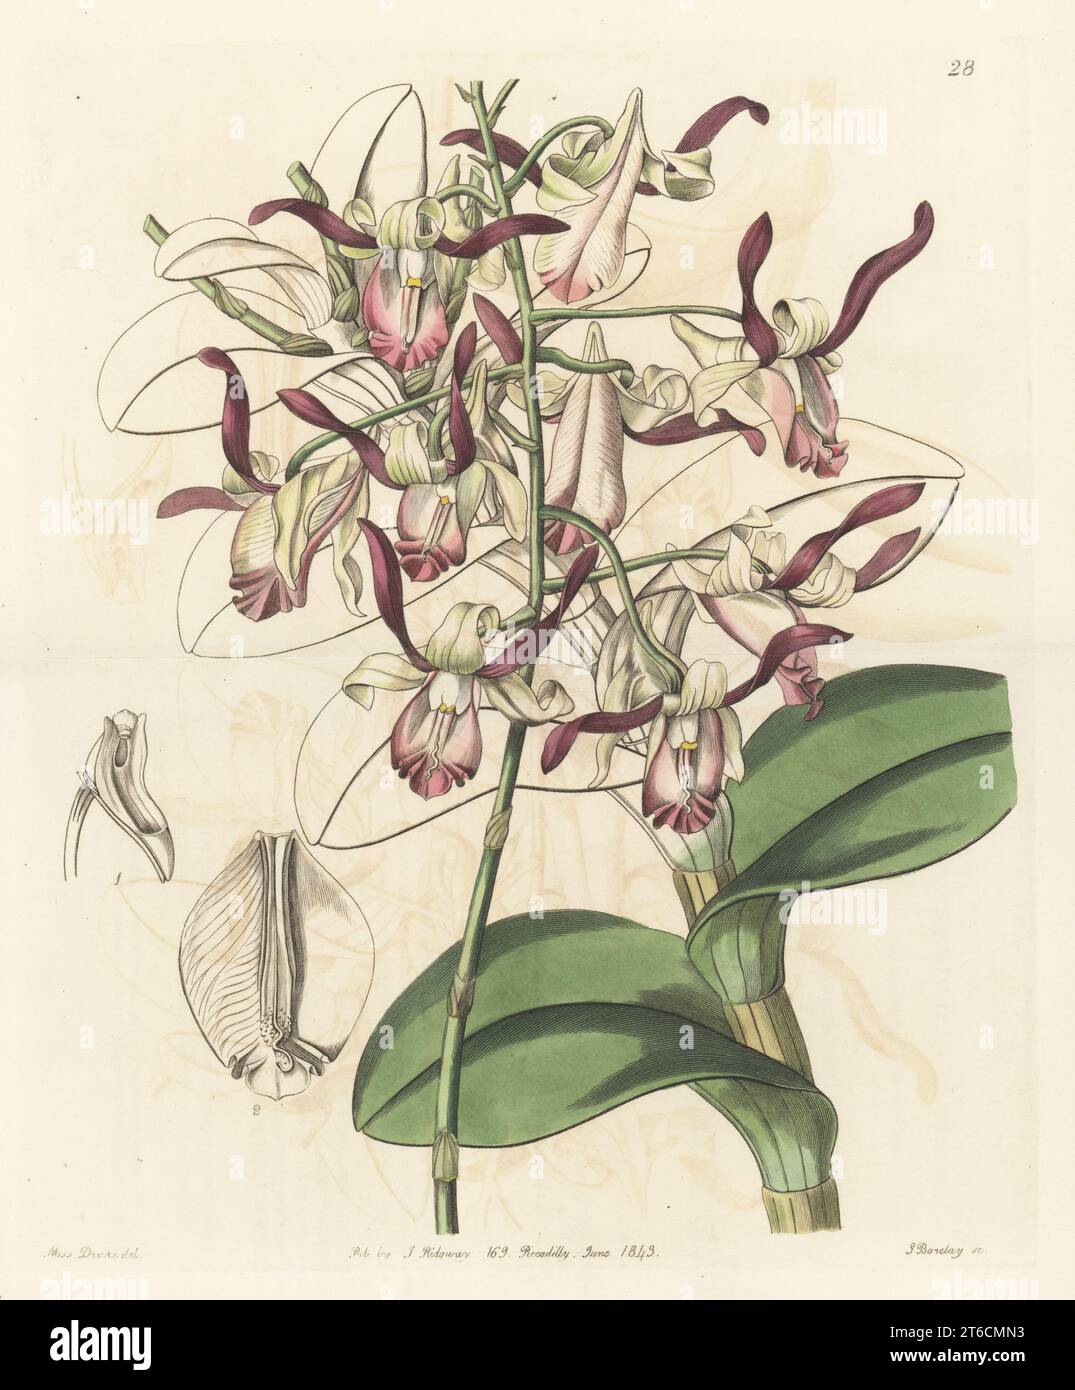 Bull orchid or bull-headed dendrobium, Dendrobium taurinum. Native to the Philippines and Indonesia. Sent to nurseryman George Loddiges by plant hunter Hugh Cuming from Manila. Handcoloured copperplate engraving by George Barclay after a botanical illustration by Sarah Drake from Edwards Botanical Register, continued by John Lindley, published by James Ridgway, London, 1843. Stock Photo